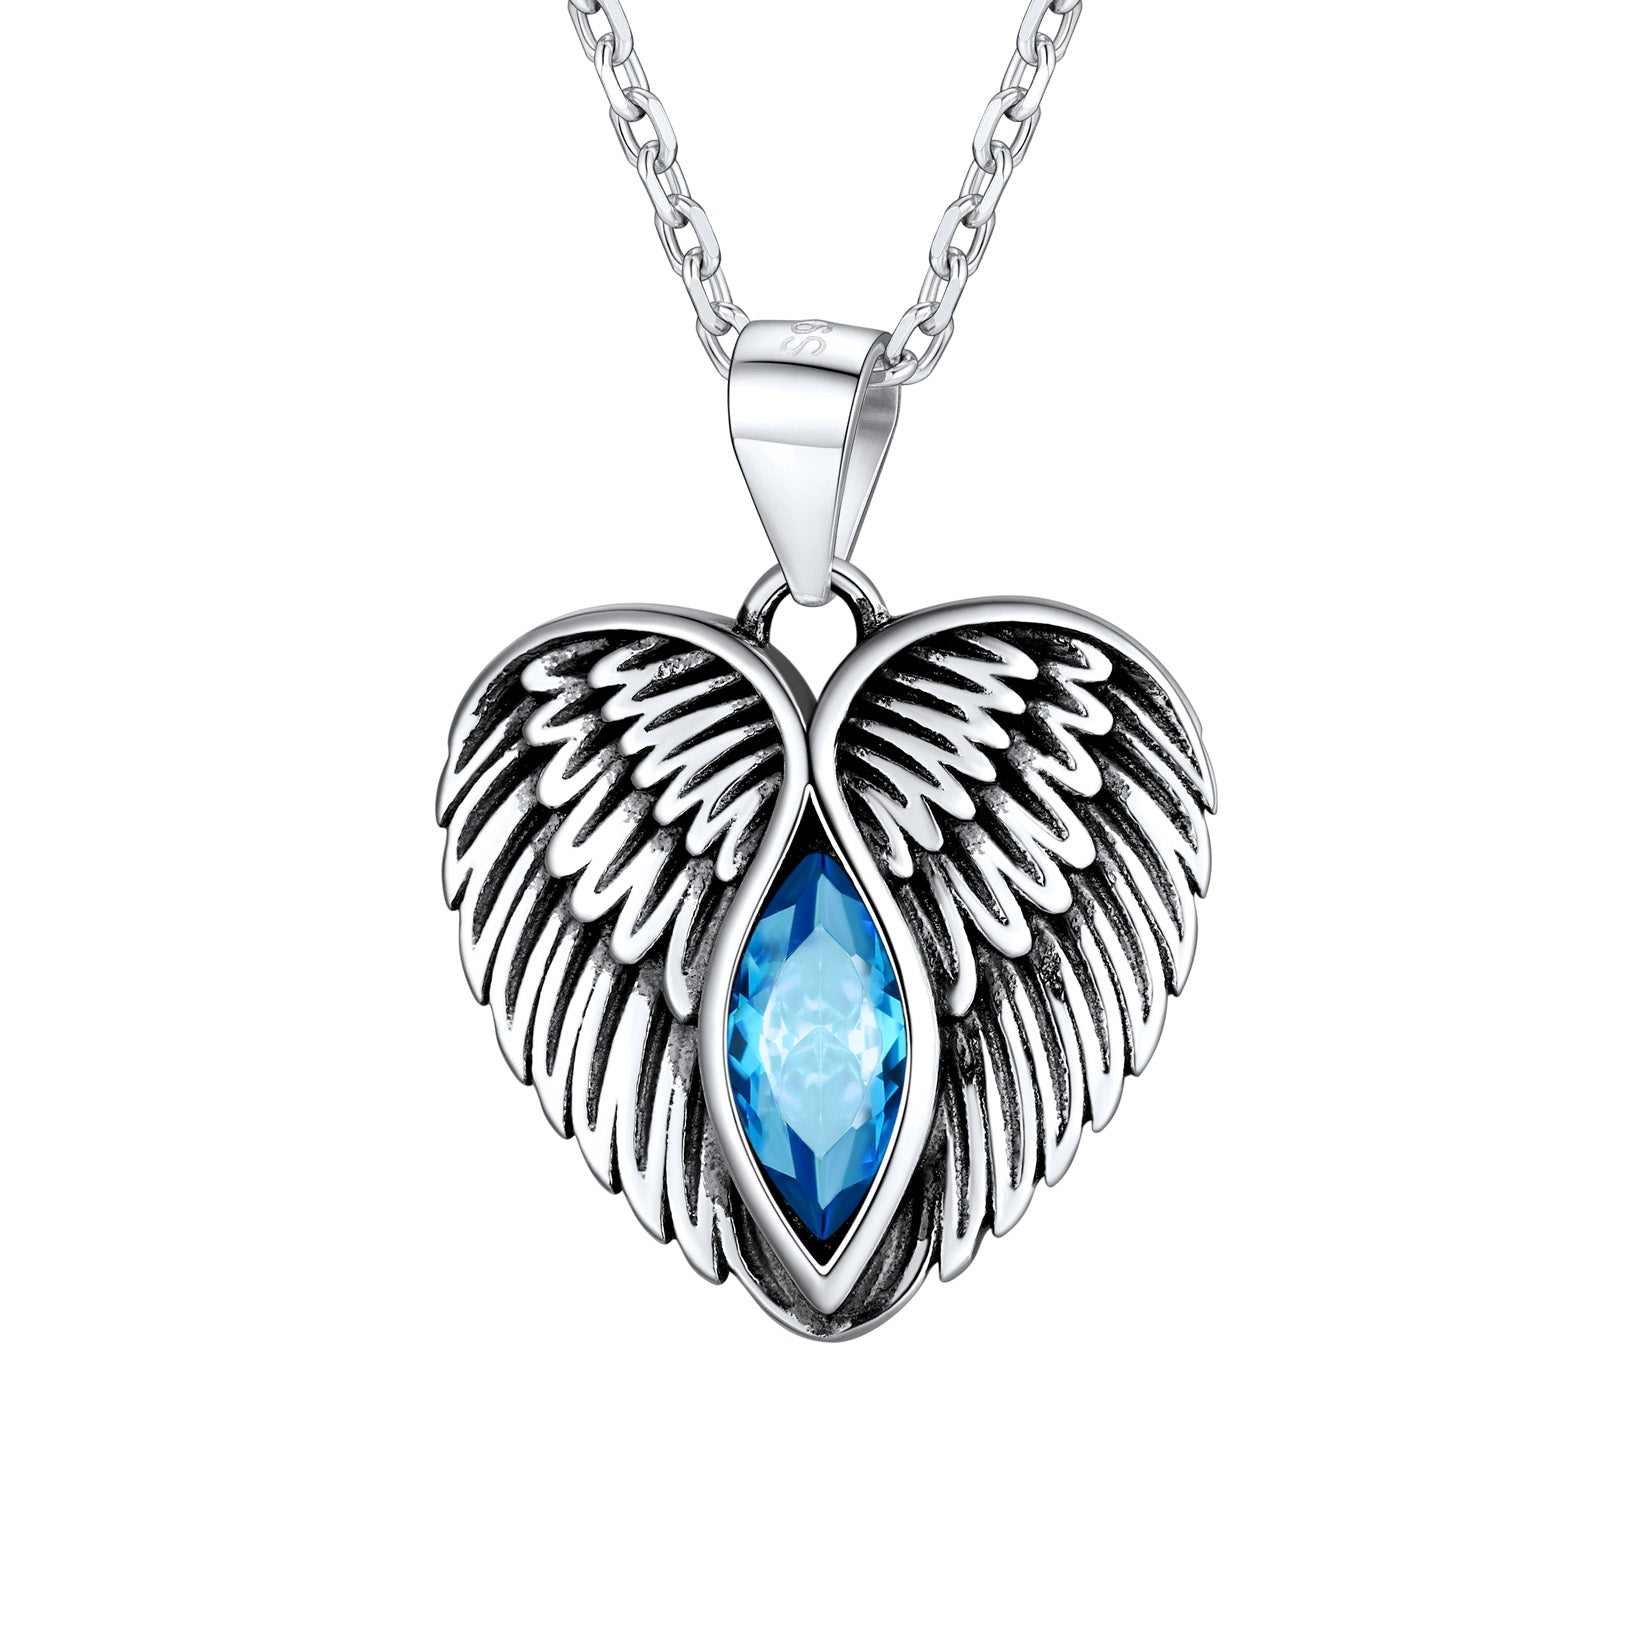 Tiny Guardian Angel Pendant Necklace - 925 Sterling Silver -  FashionJunkie4Life